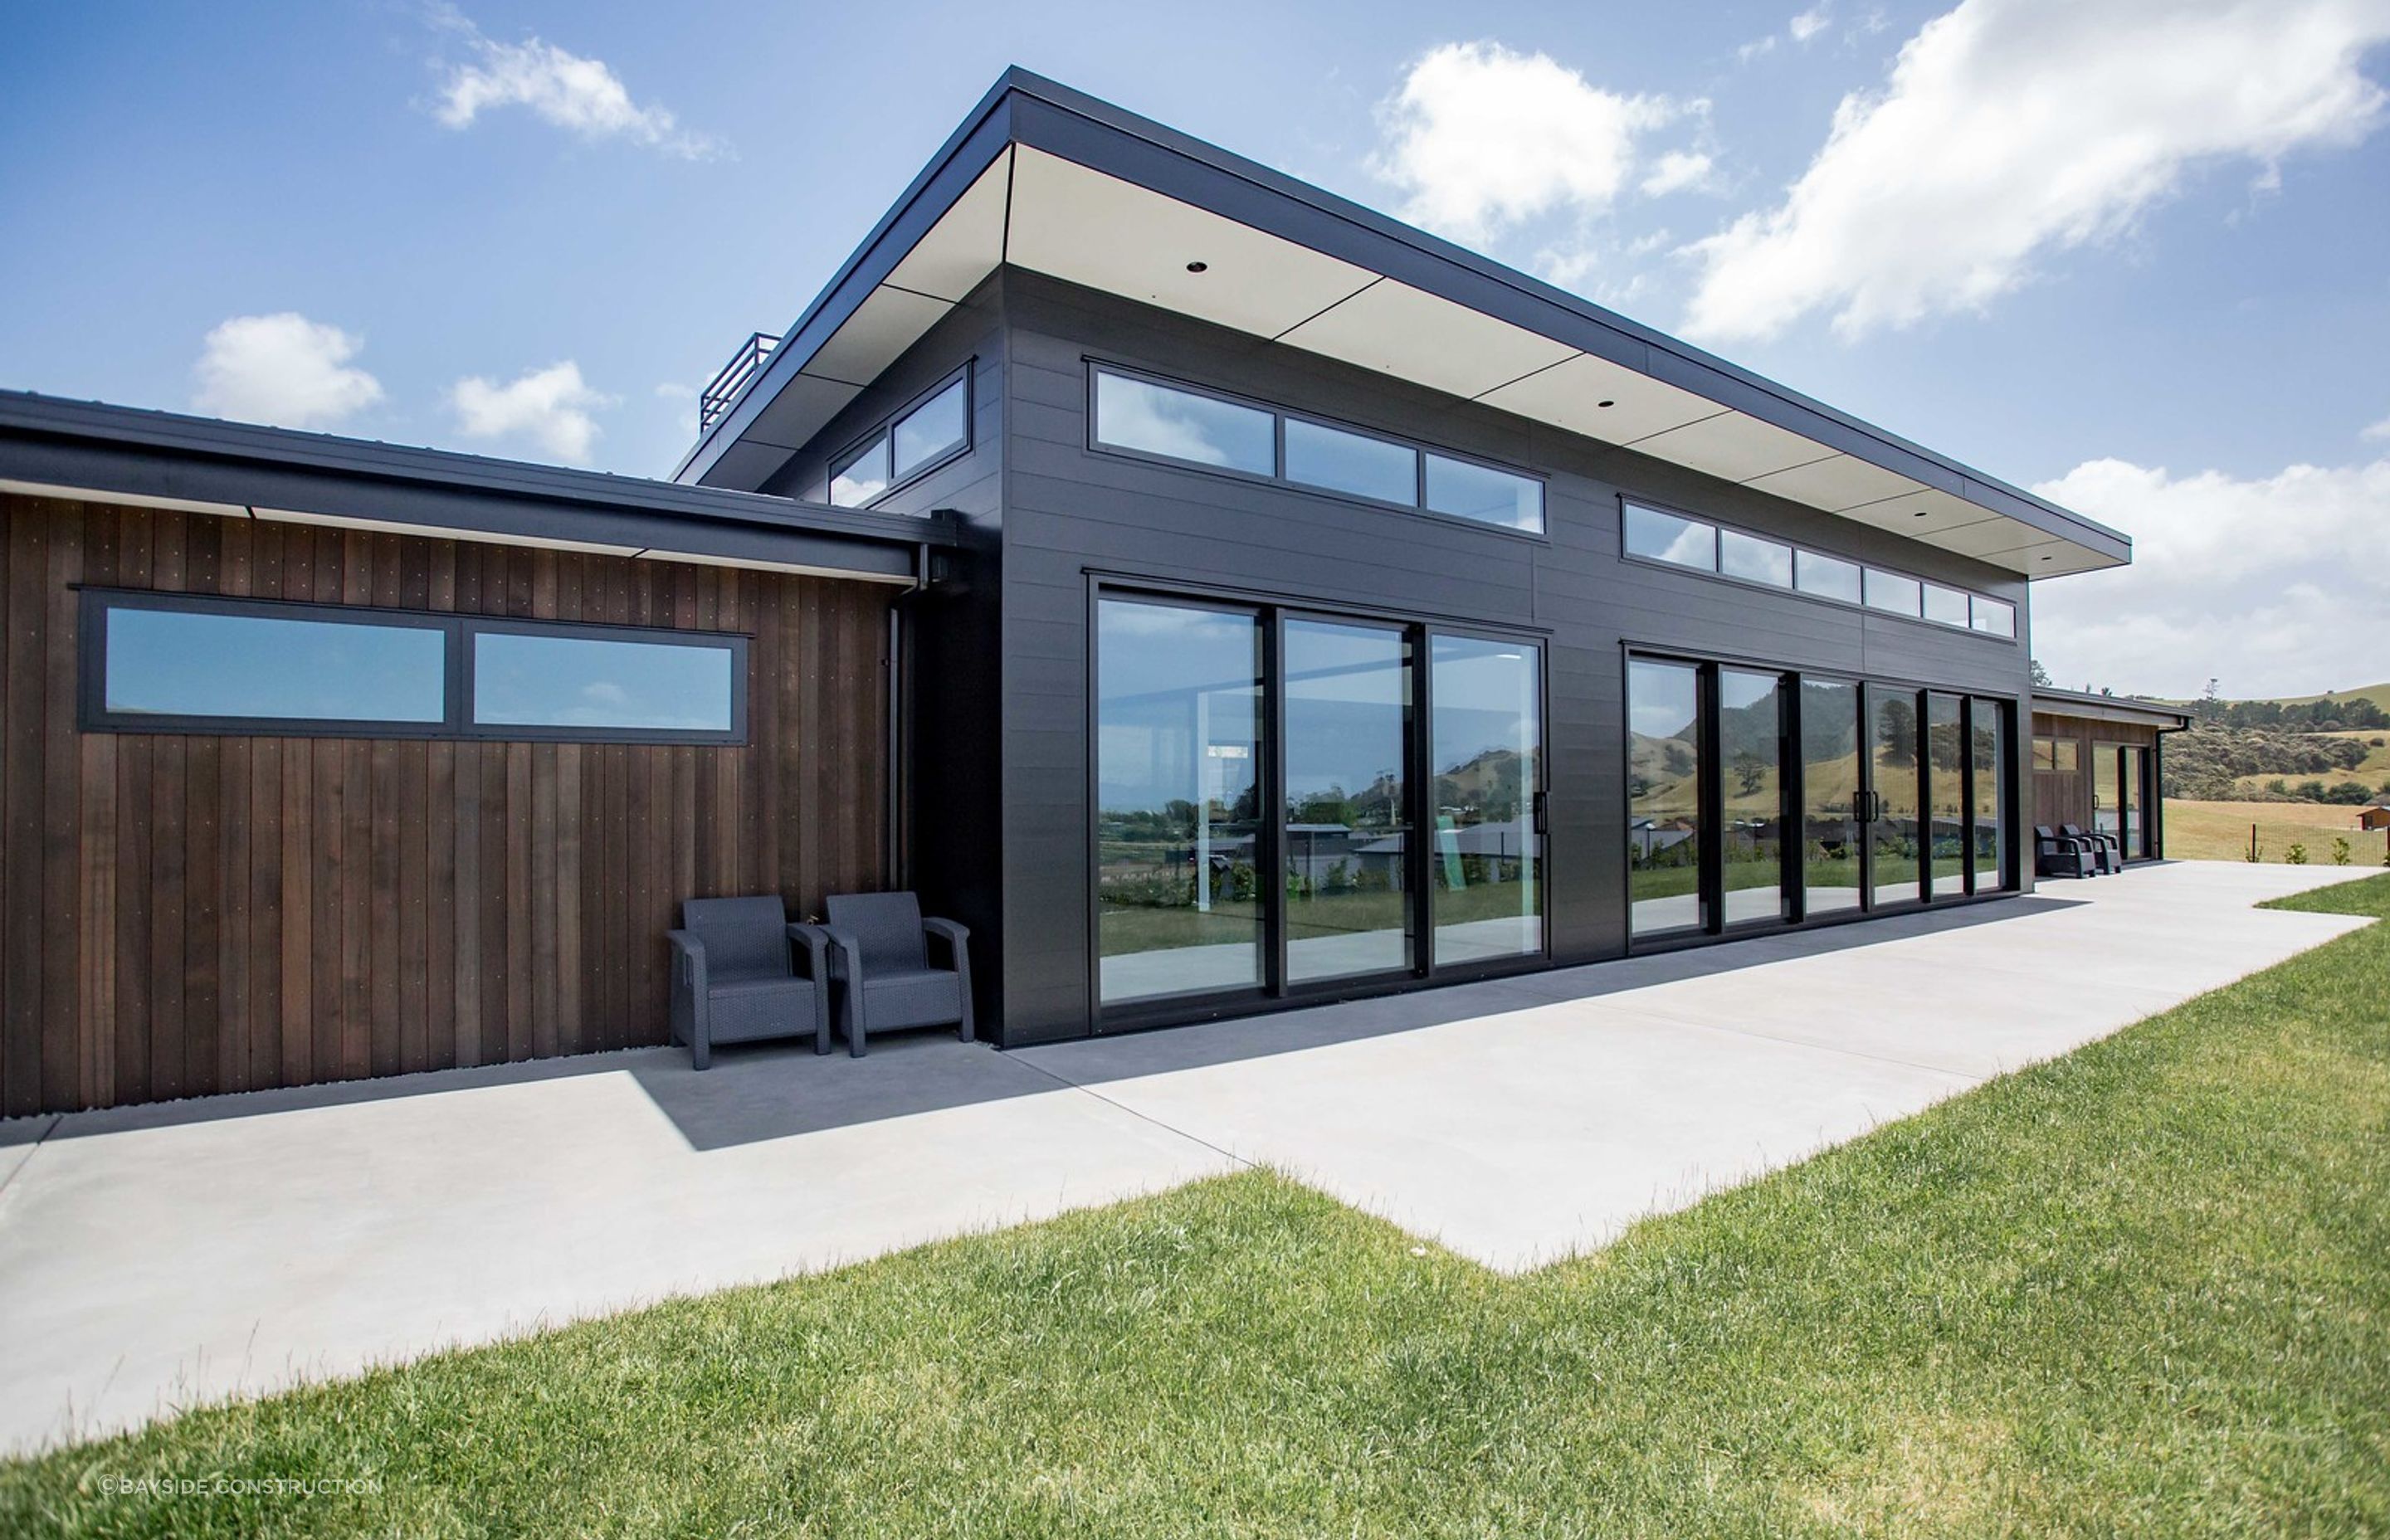 We were pleased to support Bayside Construction with the roof and rainwater system. The COLORSTEEL ® G10 Low Gloss Matt Black (Ebony) roofing material sits well in the environment.